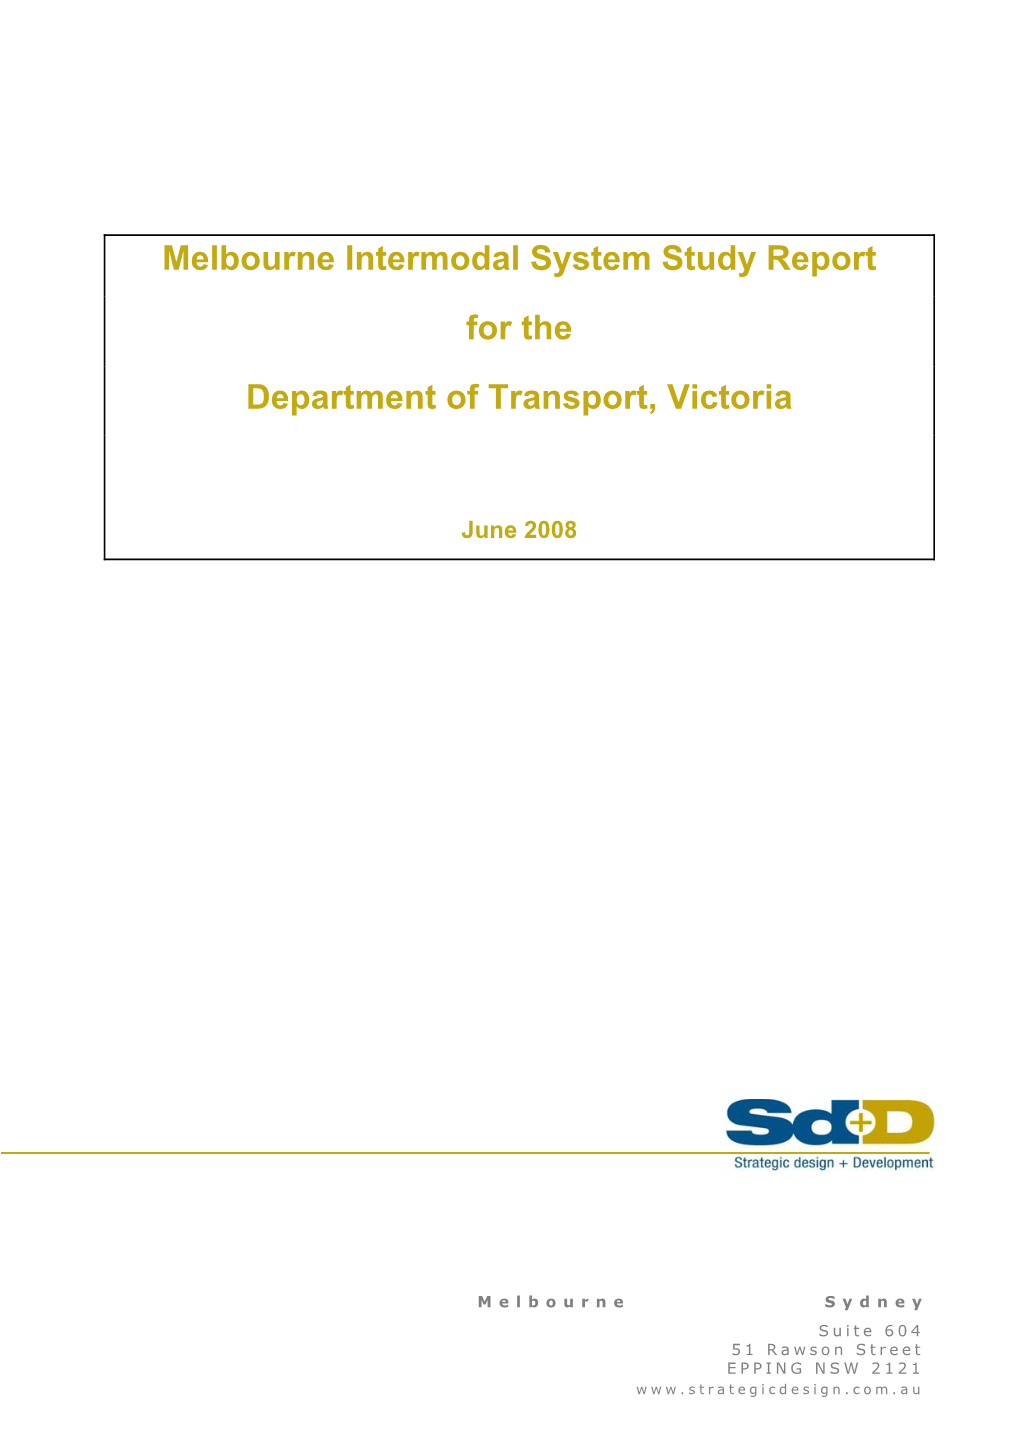 Melbourne Intermodal System Study Report for the Department Of